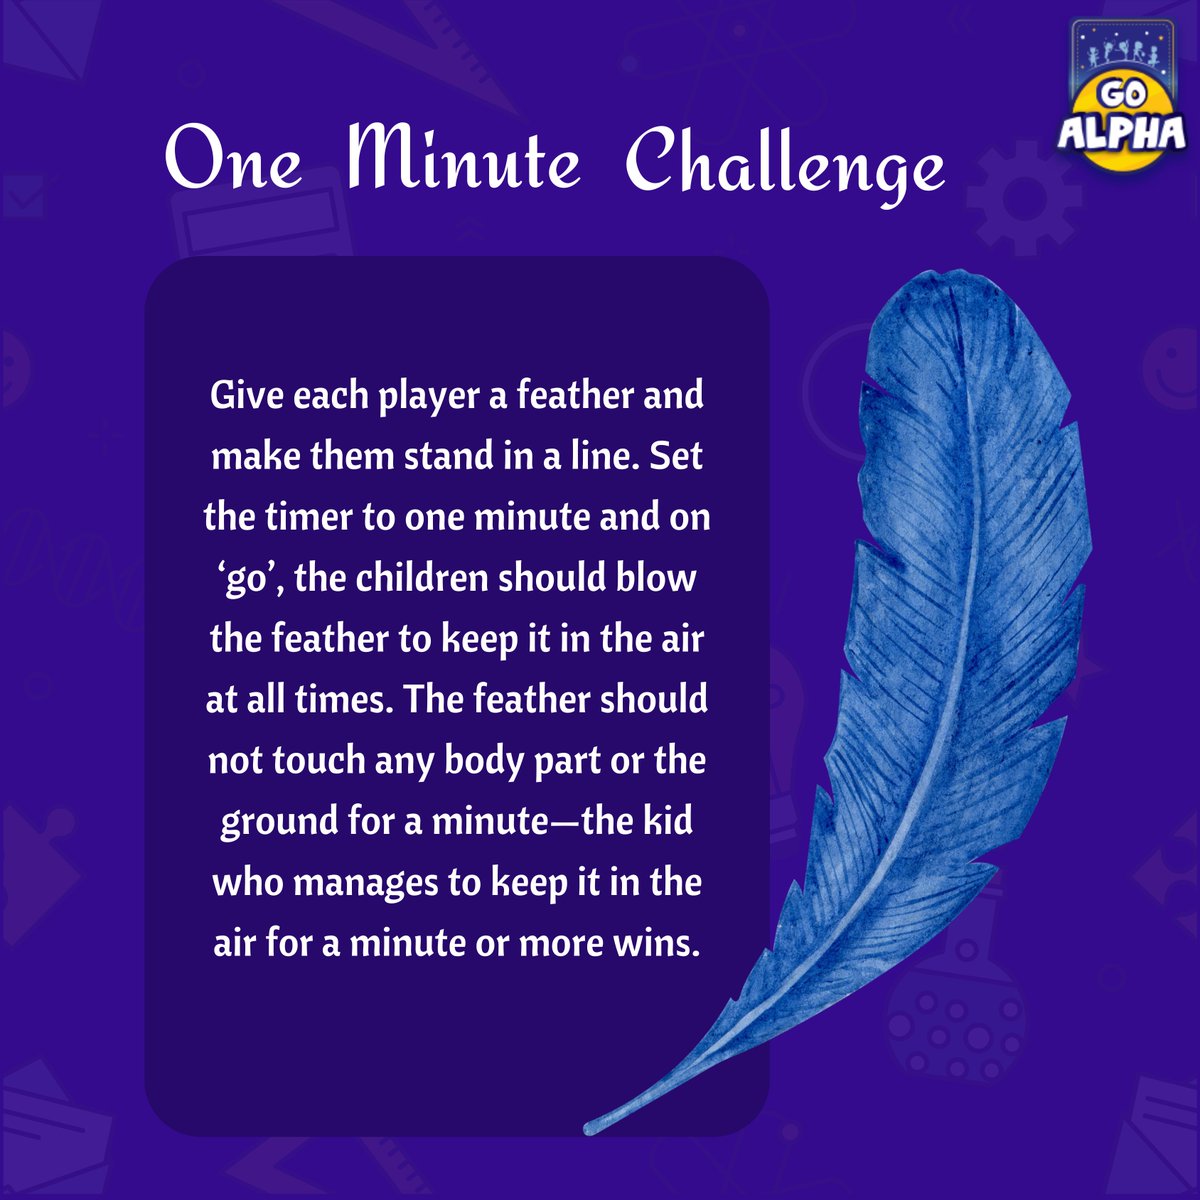 Set the timer to one minute and on ‘go’, the children should blow the feather to keep it in the air at all times. 

#sportsforkids #toddlertraining #learningwithfun #preschool #kidsnursery #kindergarten #education #earlychildhoodeducation #childcare #earlylearning #toddler